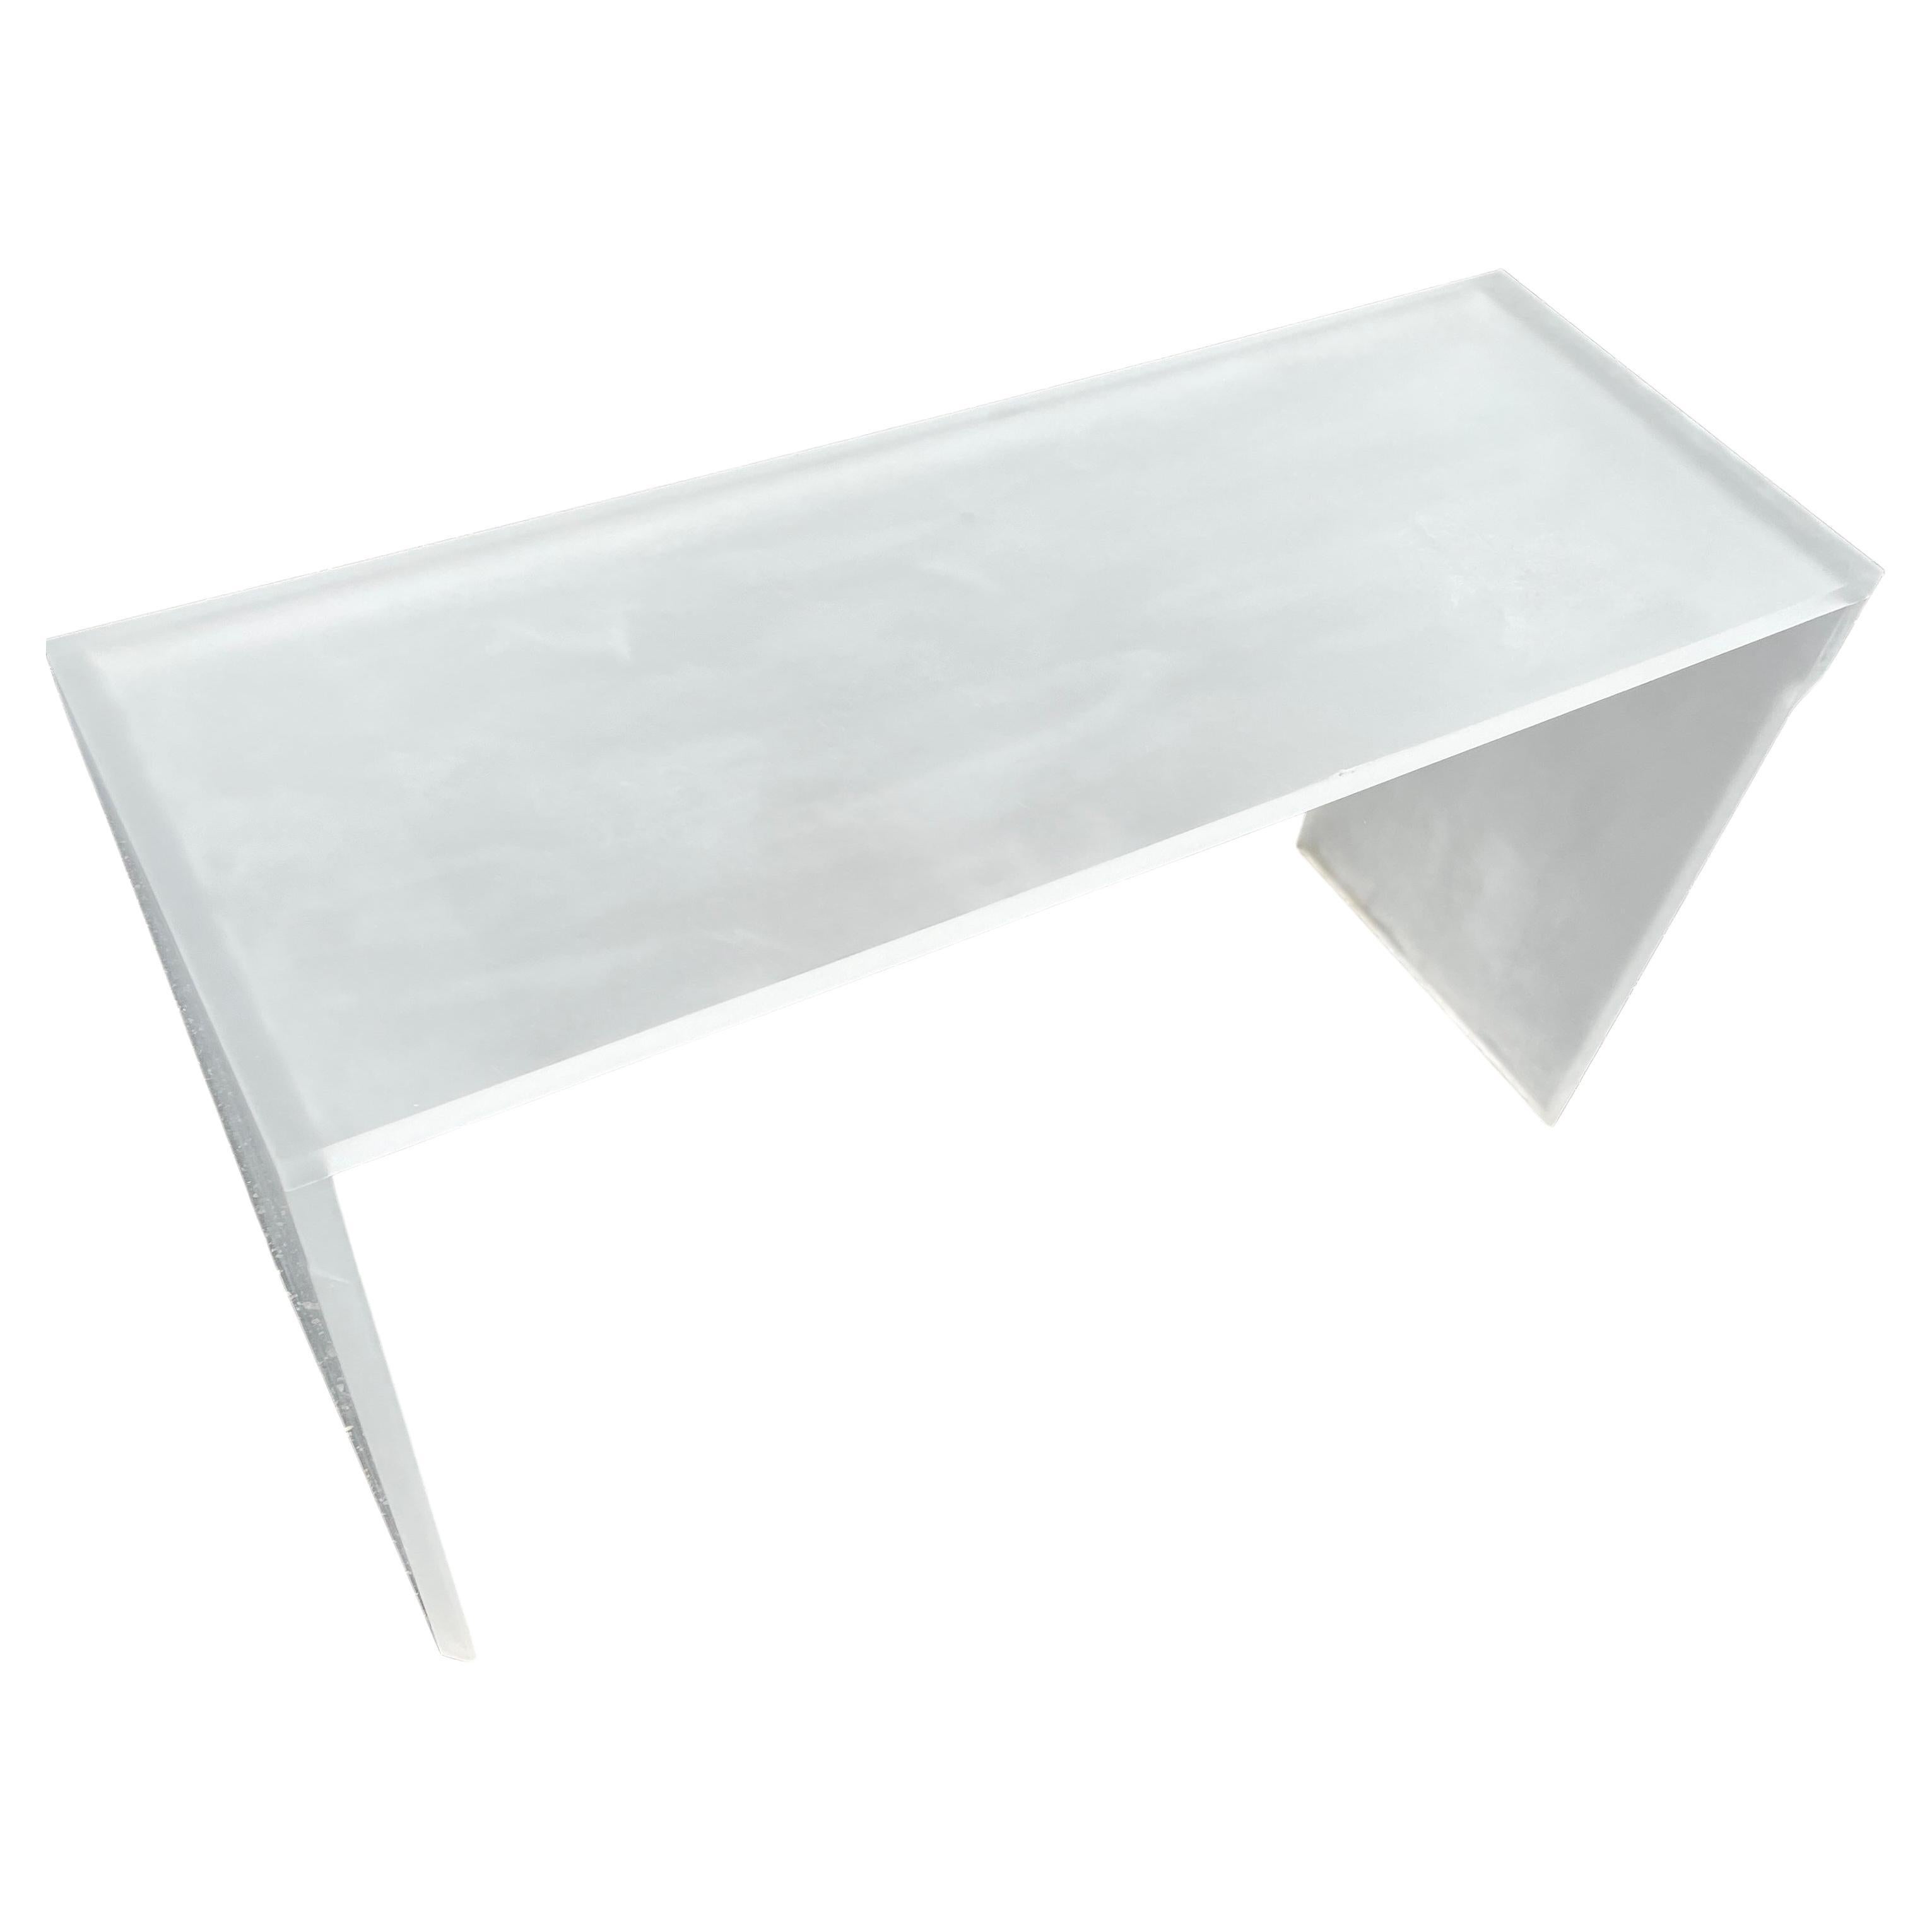 Mid-Century Modern Foyer console in Frosted Lucite, Italy 1970's.
The legs have beveled edges. 